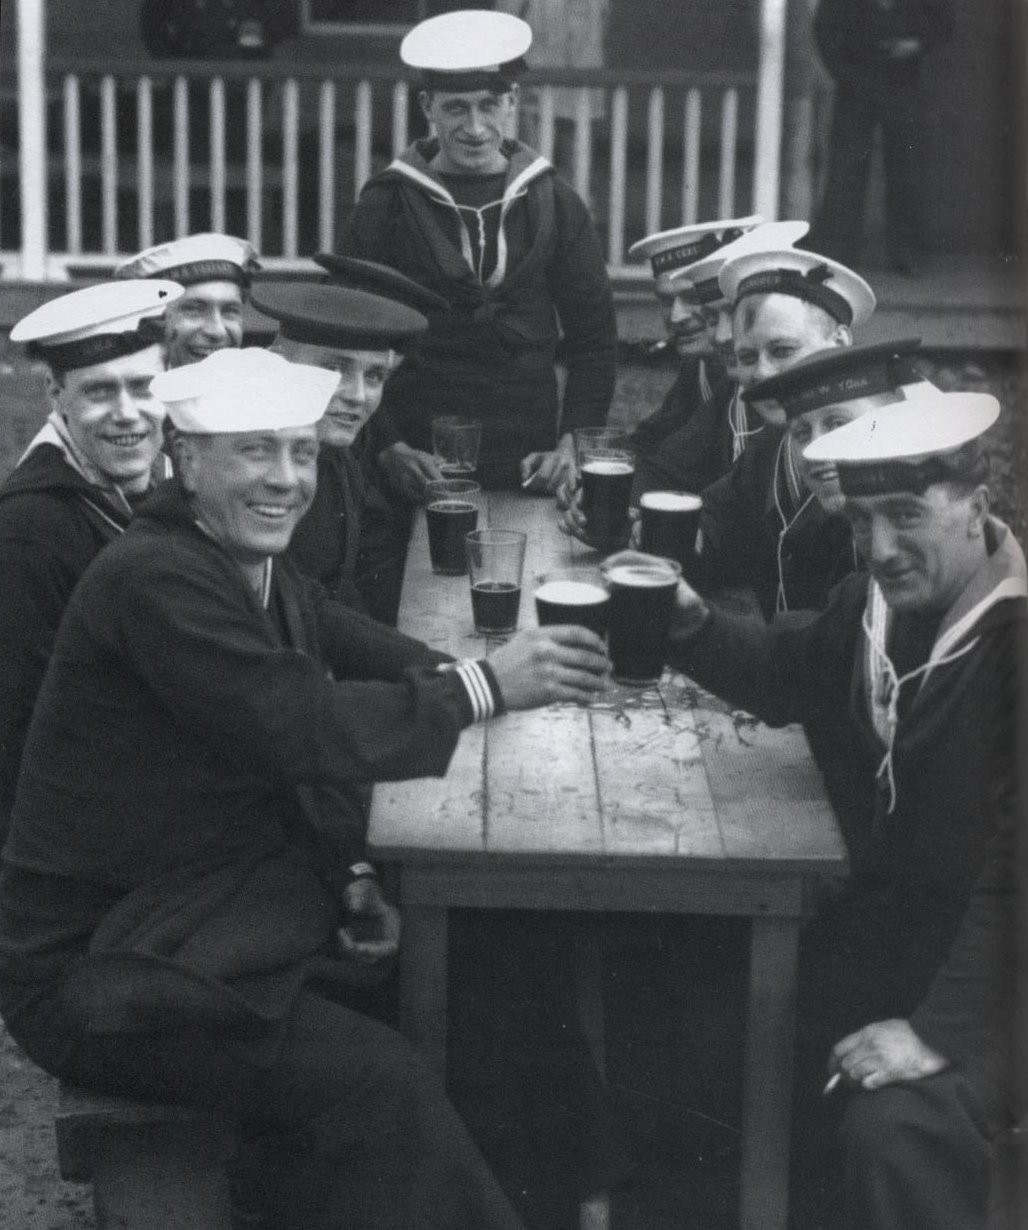 American and British Sailors, Rosyth, WWII